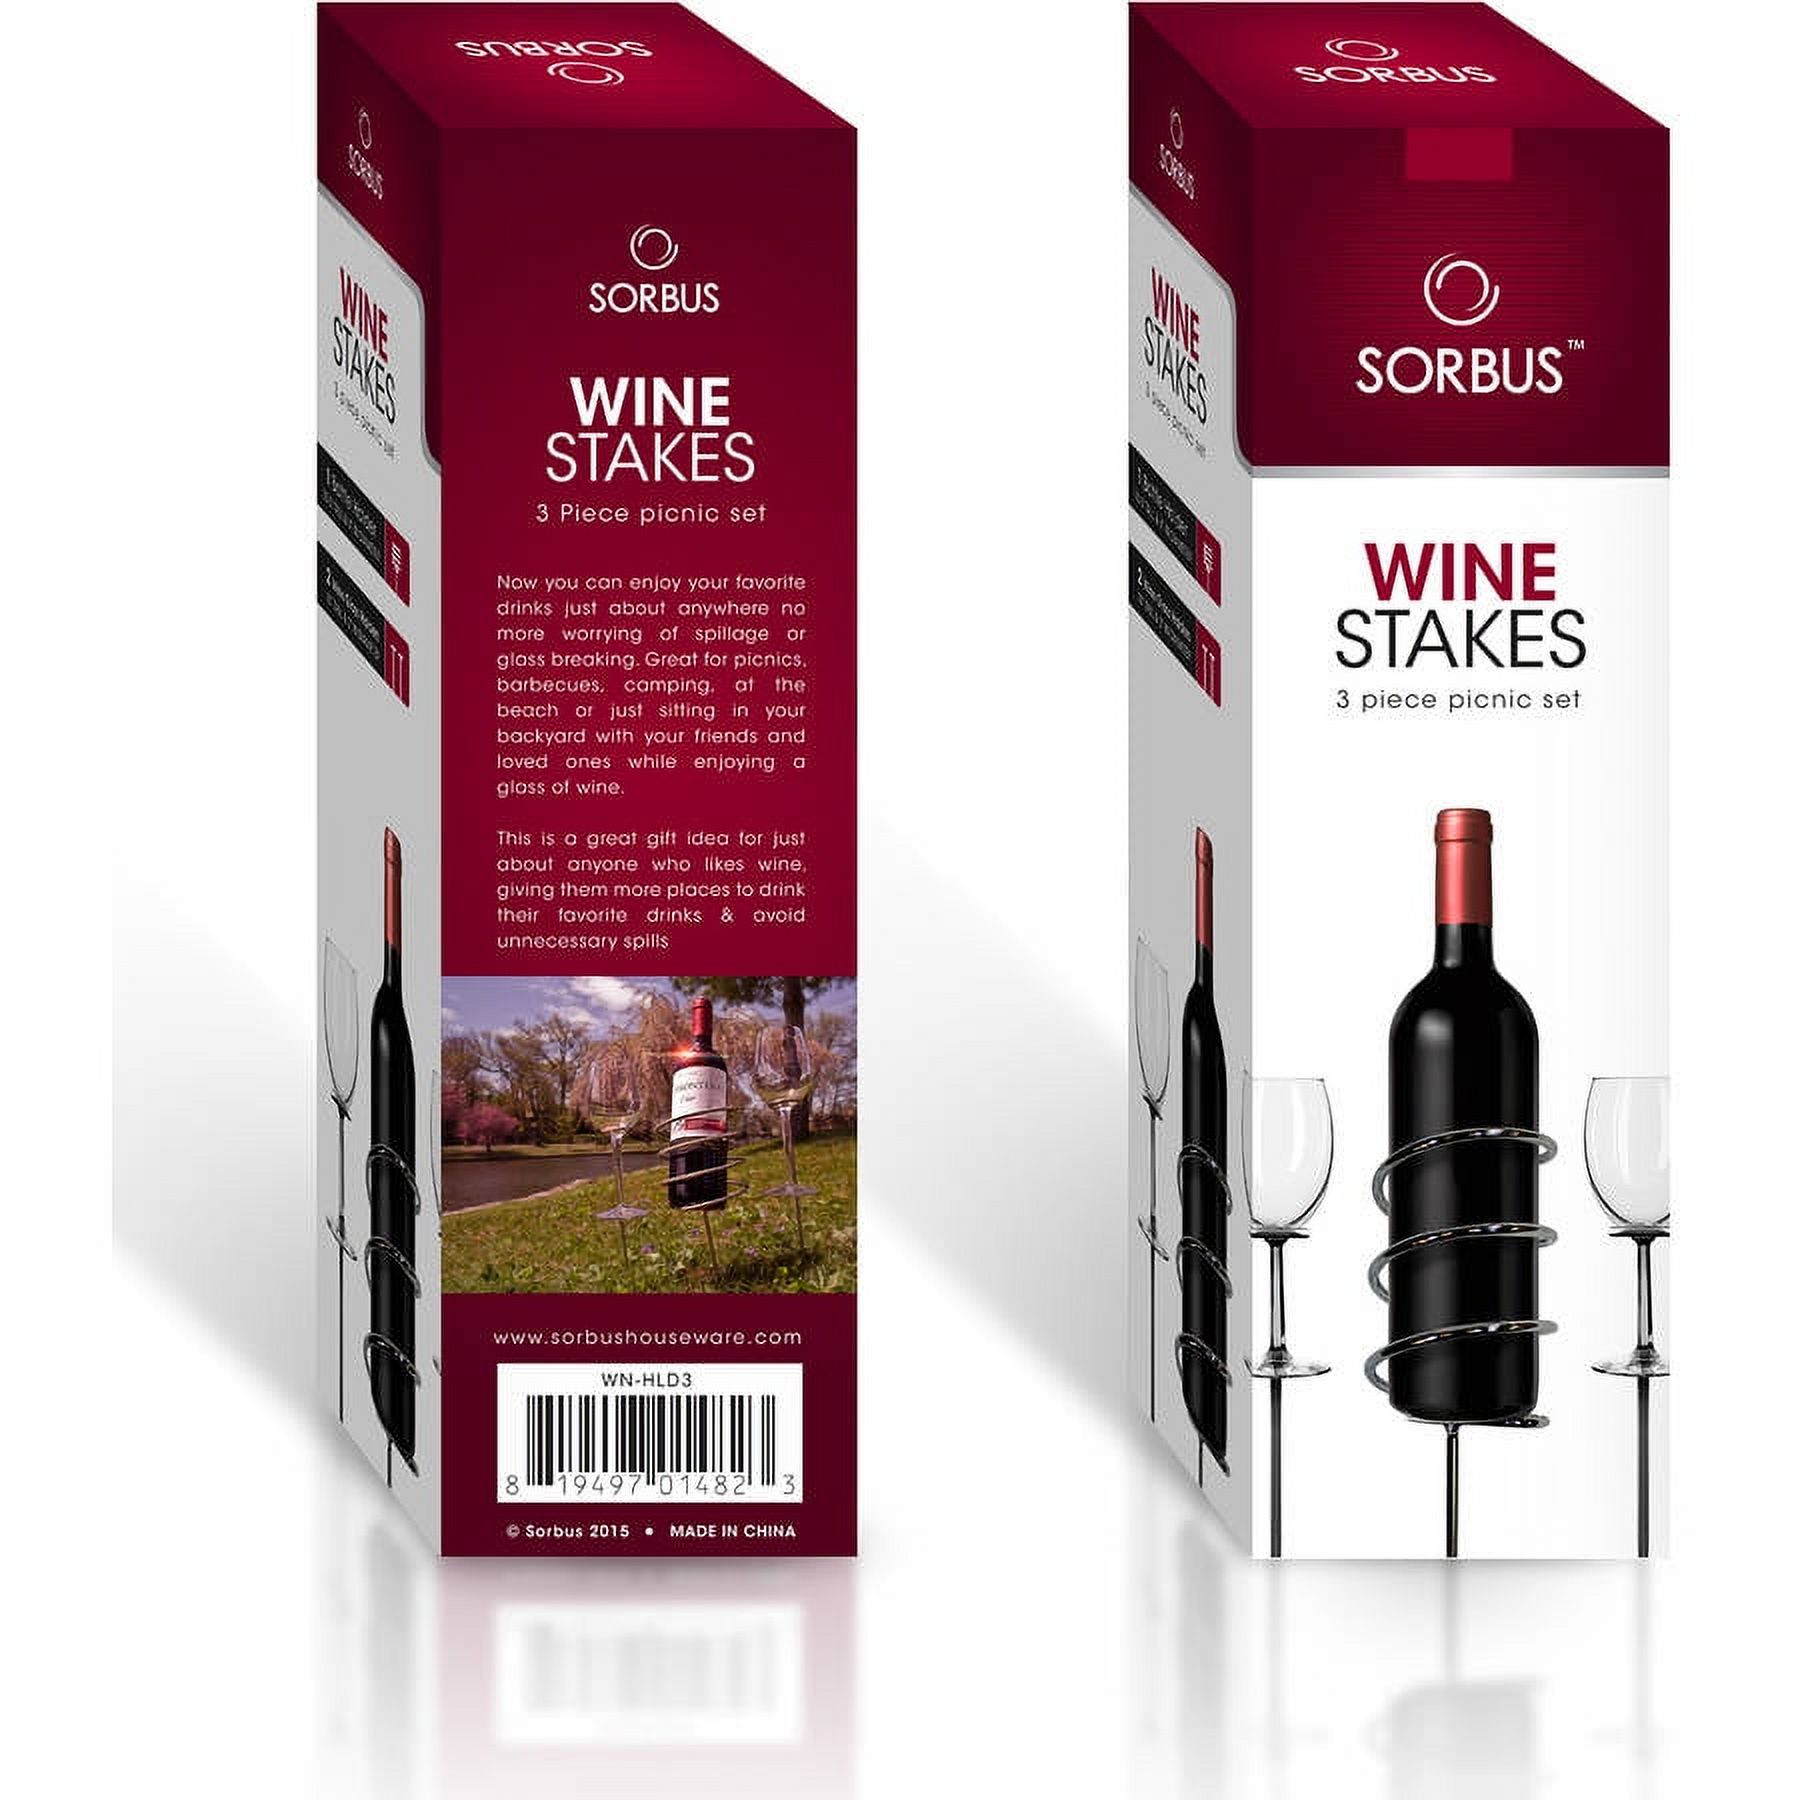 Sorbus Wine Stakes Set, Wine Sticks Holds Bottle and 2 Glasses Preventing Them from Spilling or Breaking, Great for Outdoor Drinking By Picnic, Camping or Party - image 1 of 3